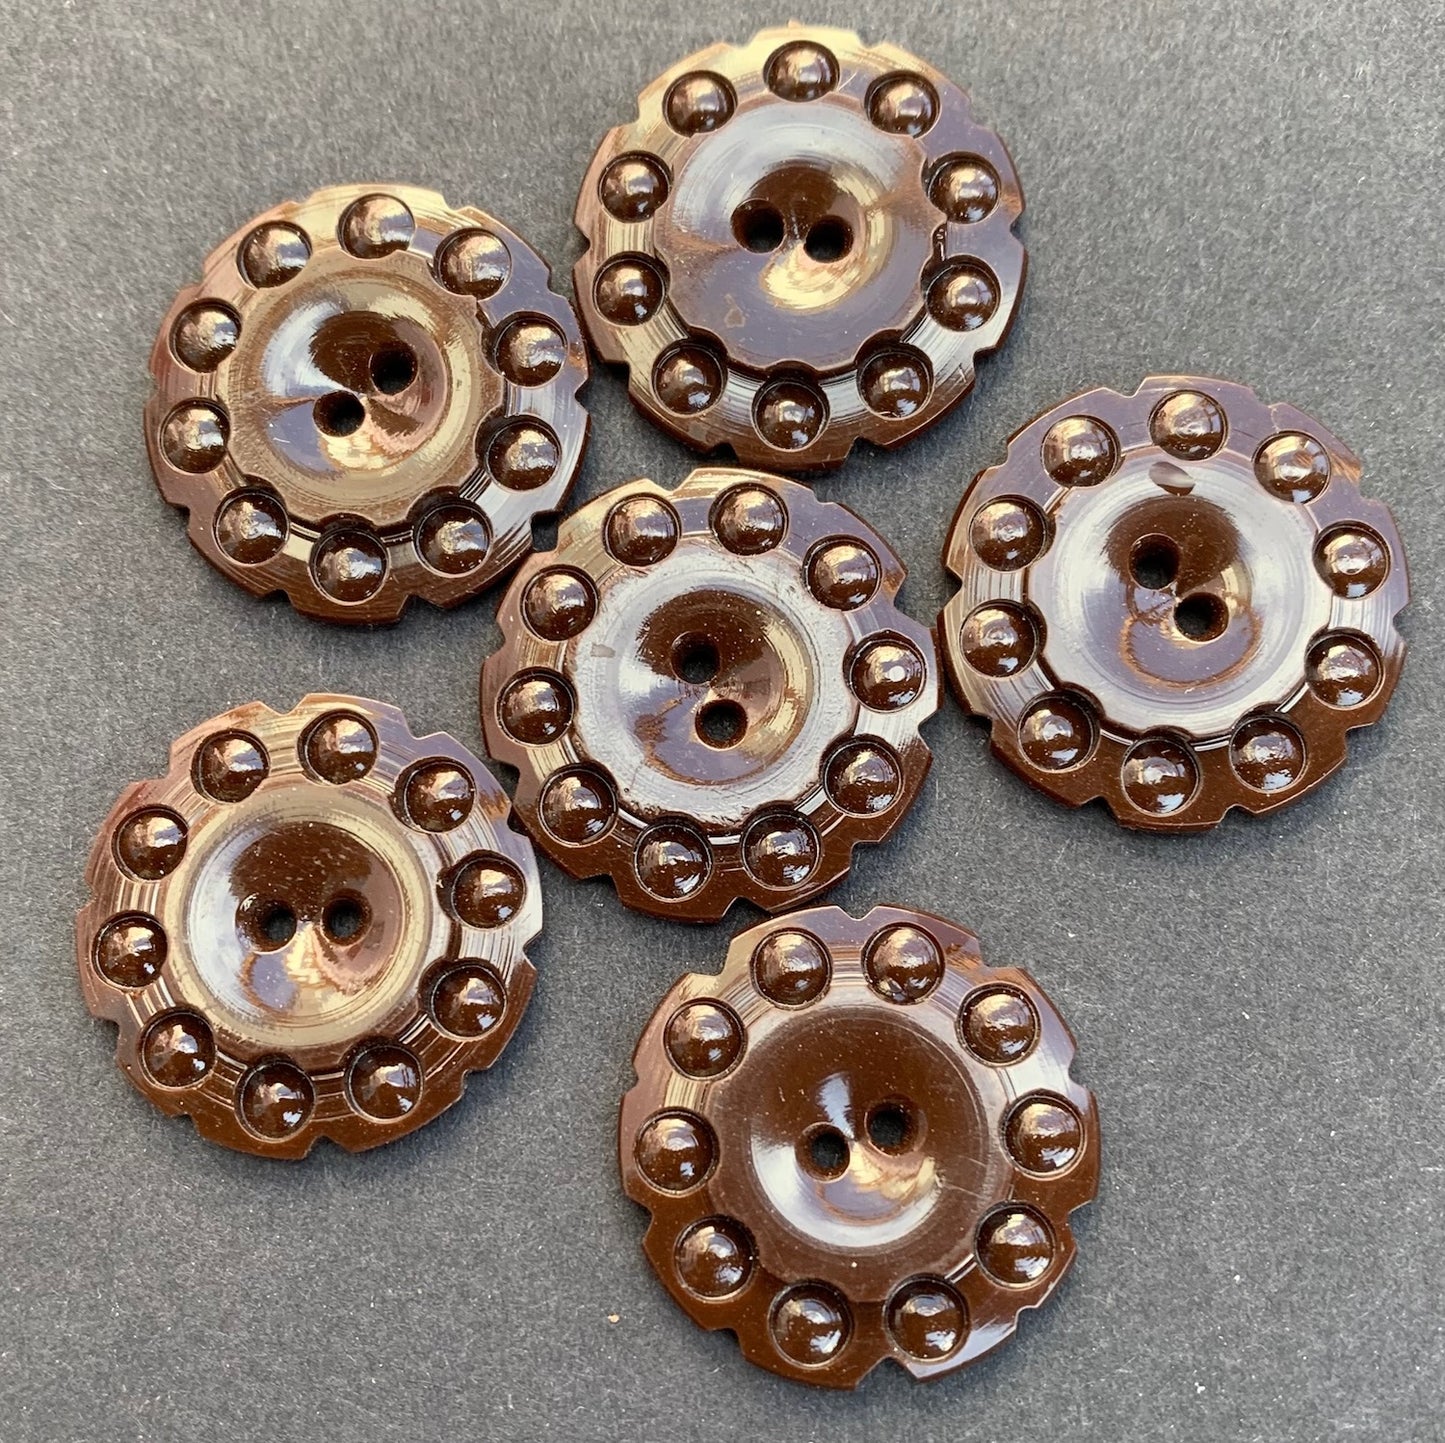 2.2cm Dark Brown Shiny Vintage Buttons - 6 or 24